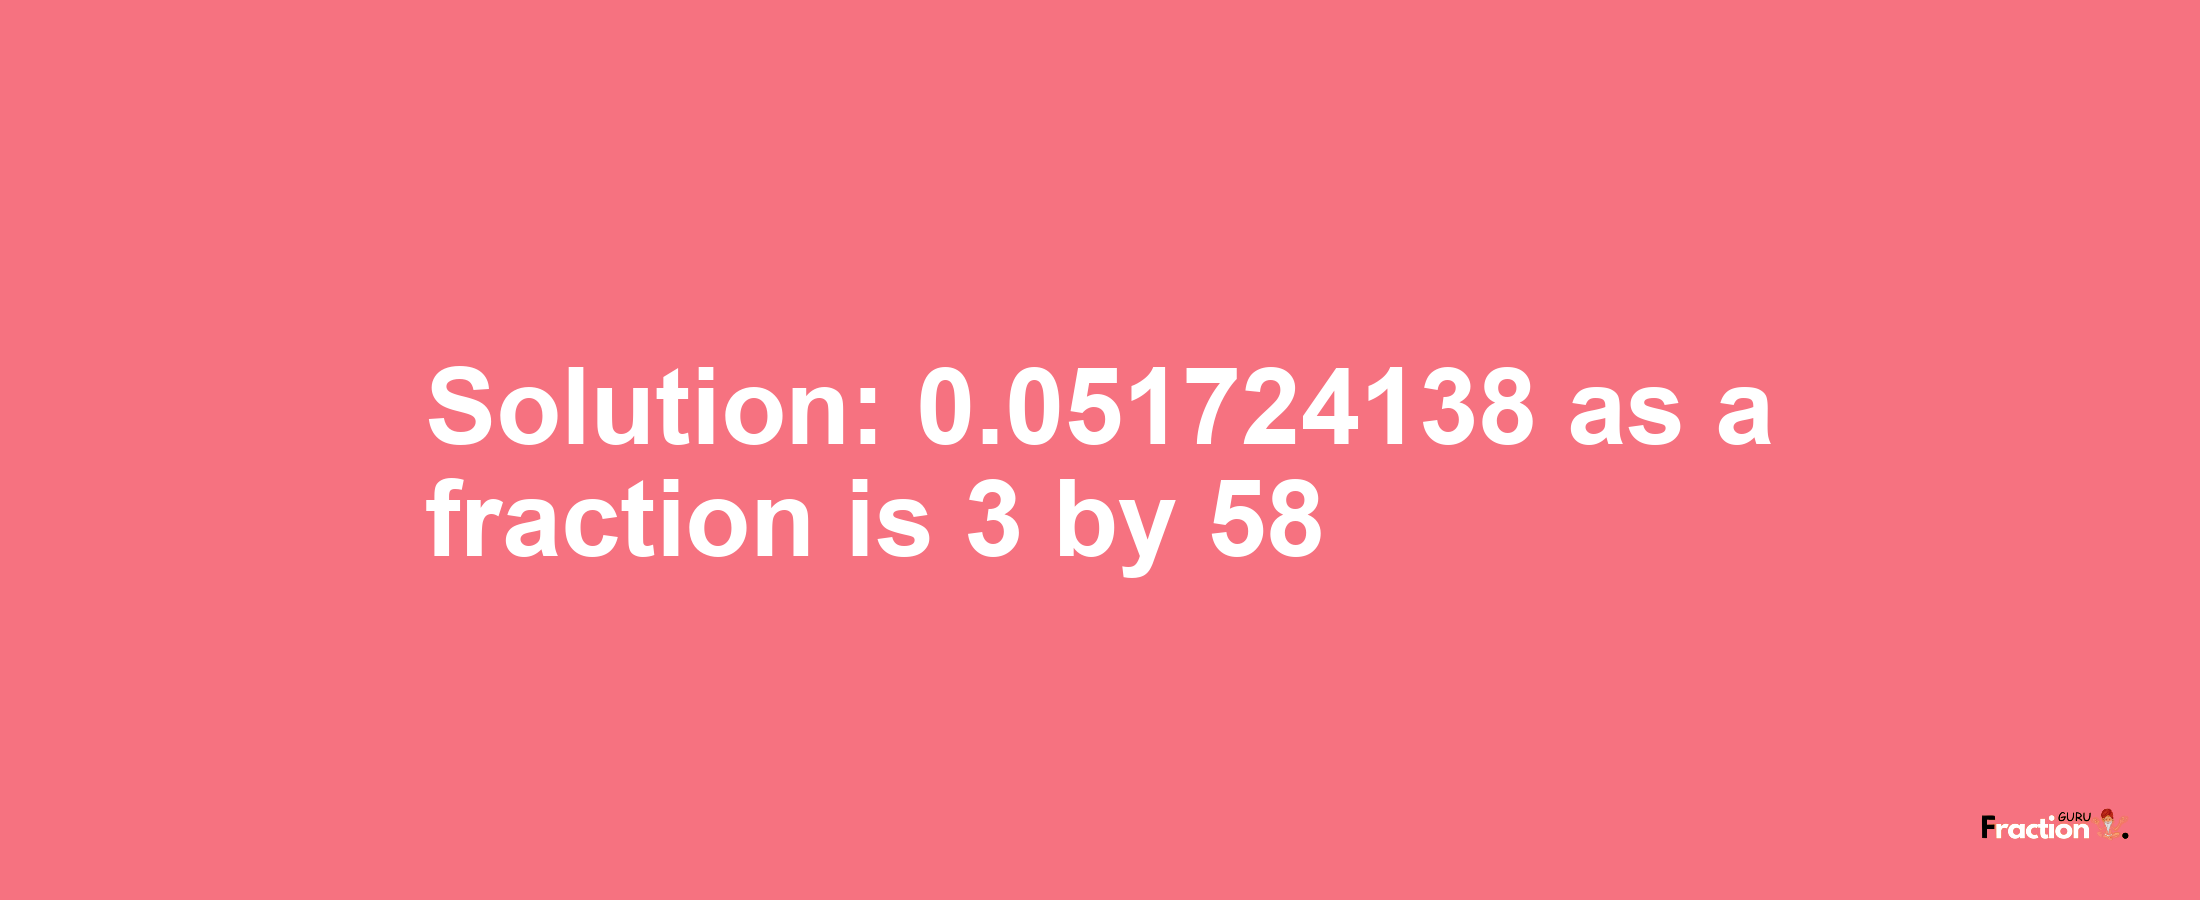 Solution:0.051724138 as a fraction is 3/58